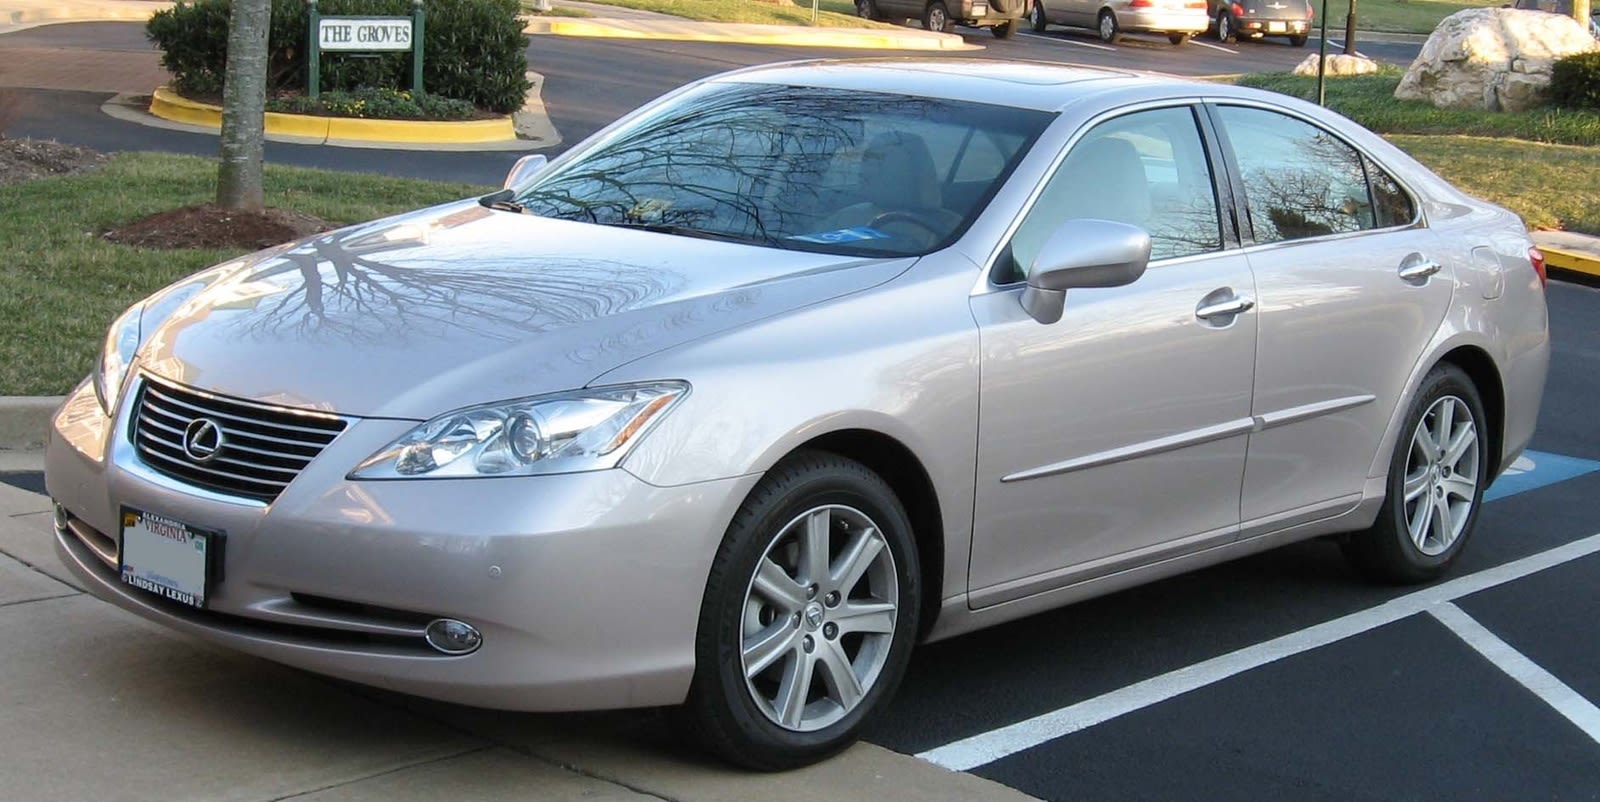 Illustration for article titled My Uber from the airport was a Lexus ES350 like this one, and I simply loved being a passenger in it